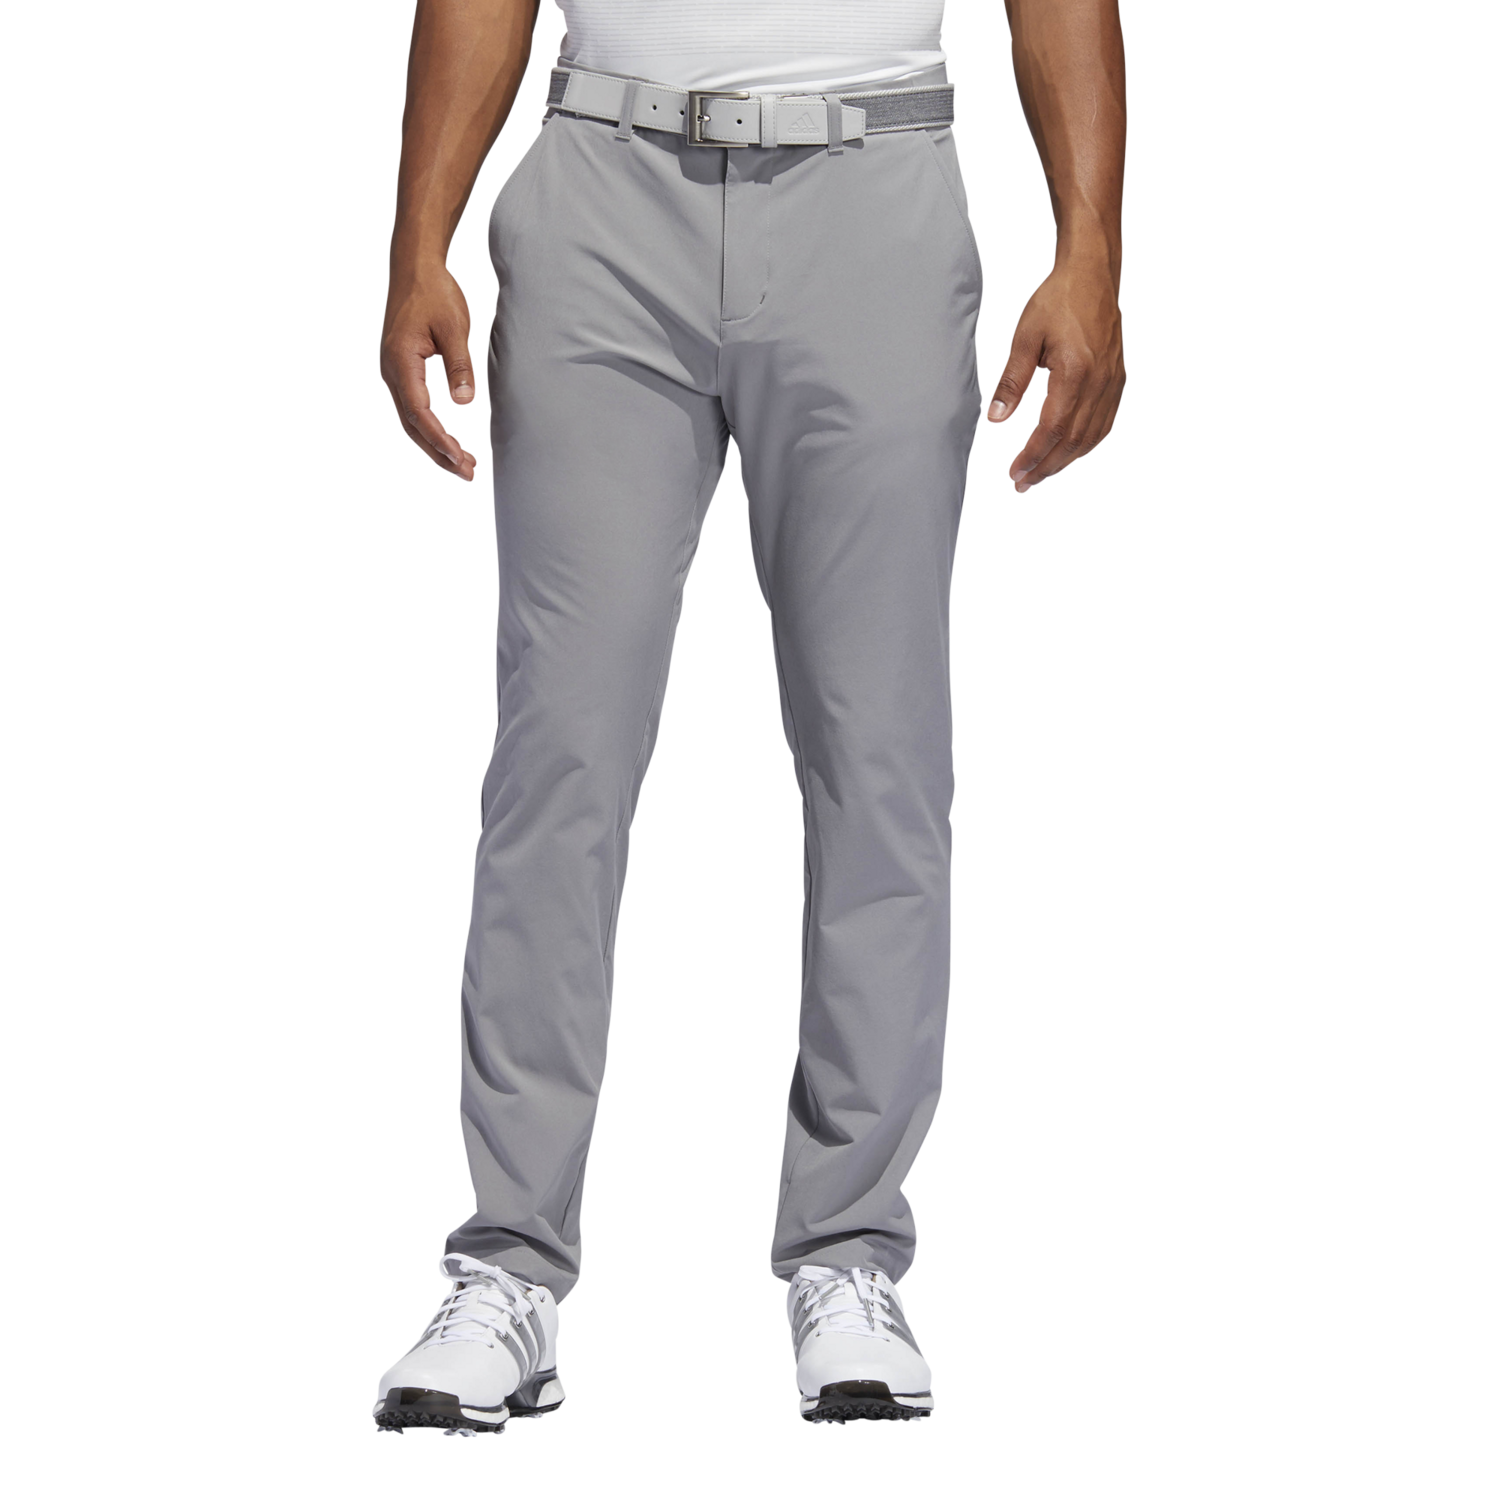 ultimate365 tapered trousers